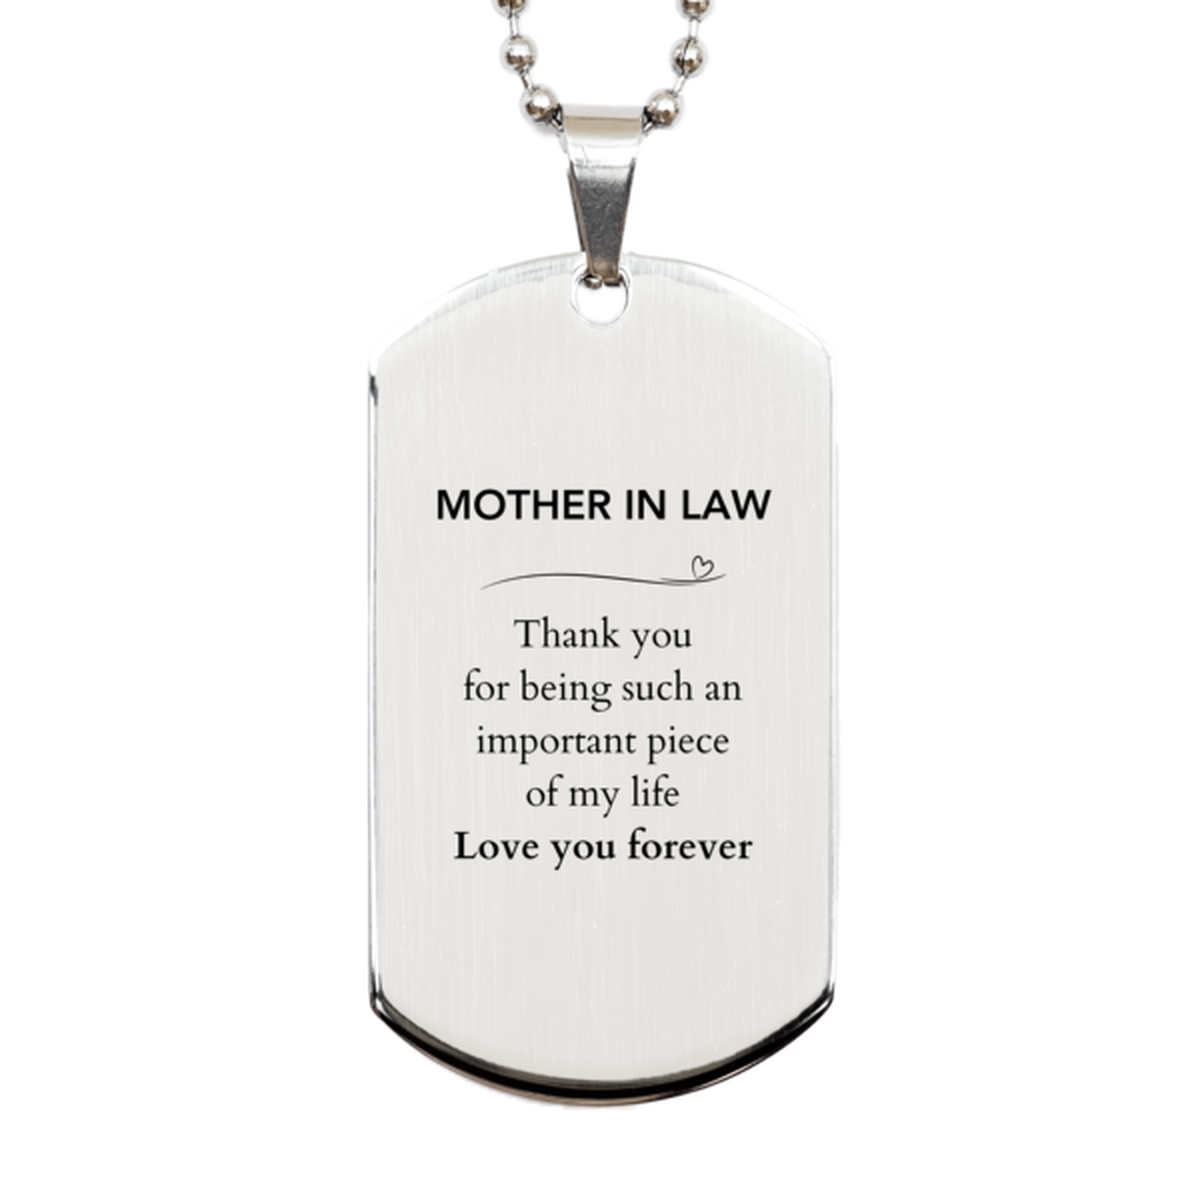 Appropriate Mother In Law Silver Dog Tag Epic Birthday Gifts for Mother In Law Thank you for being such an important piece of my life Mother In Law Christmas Mothers Fathers Day